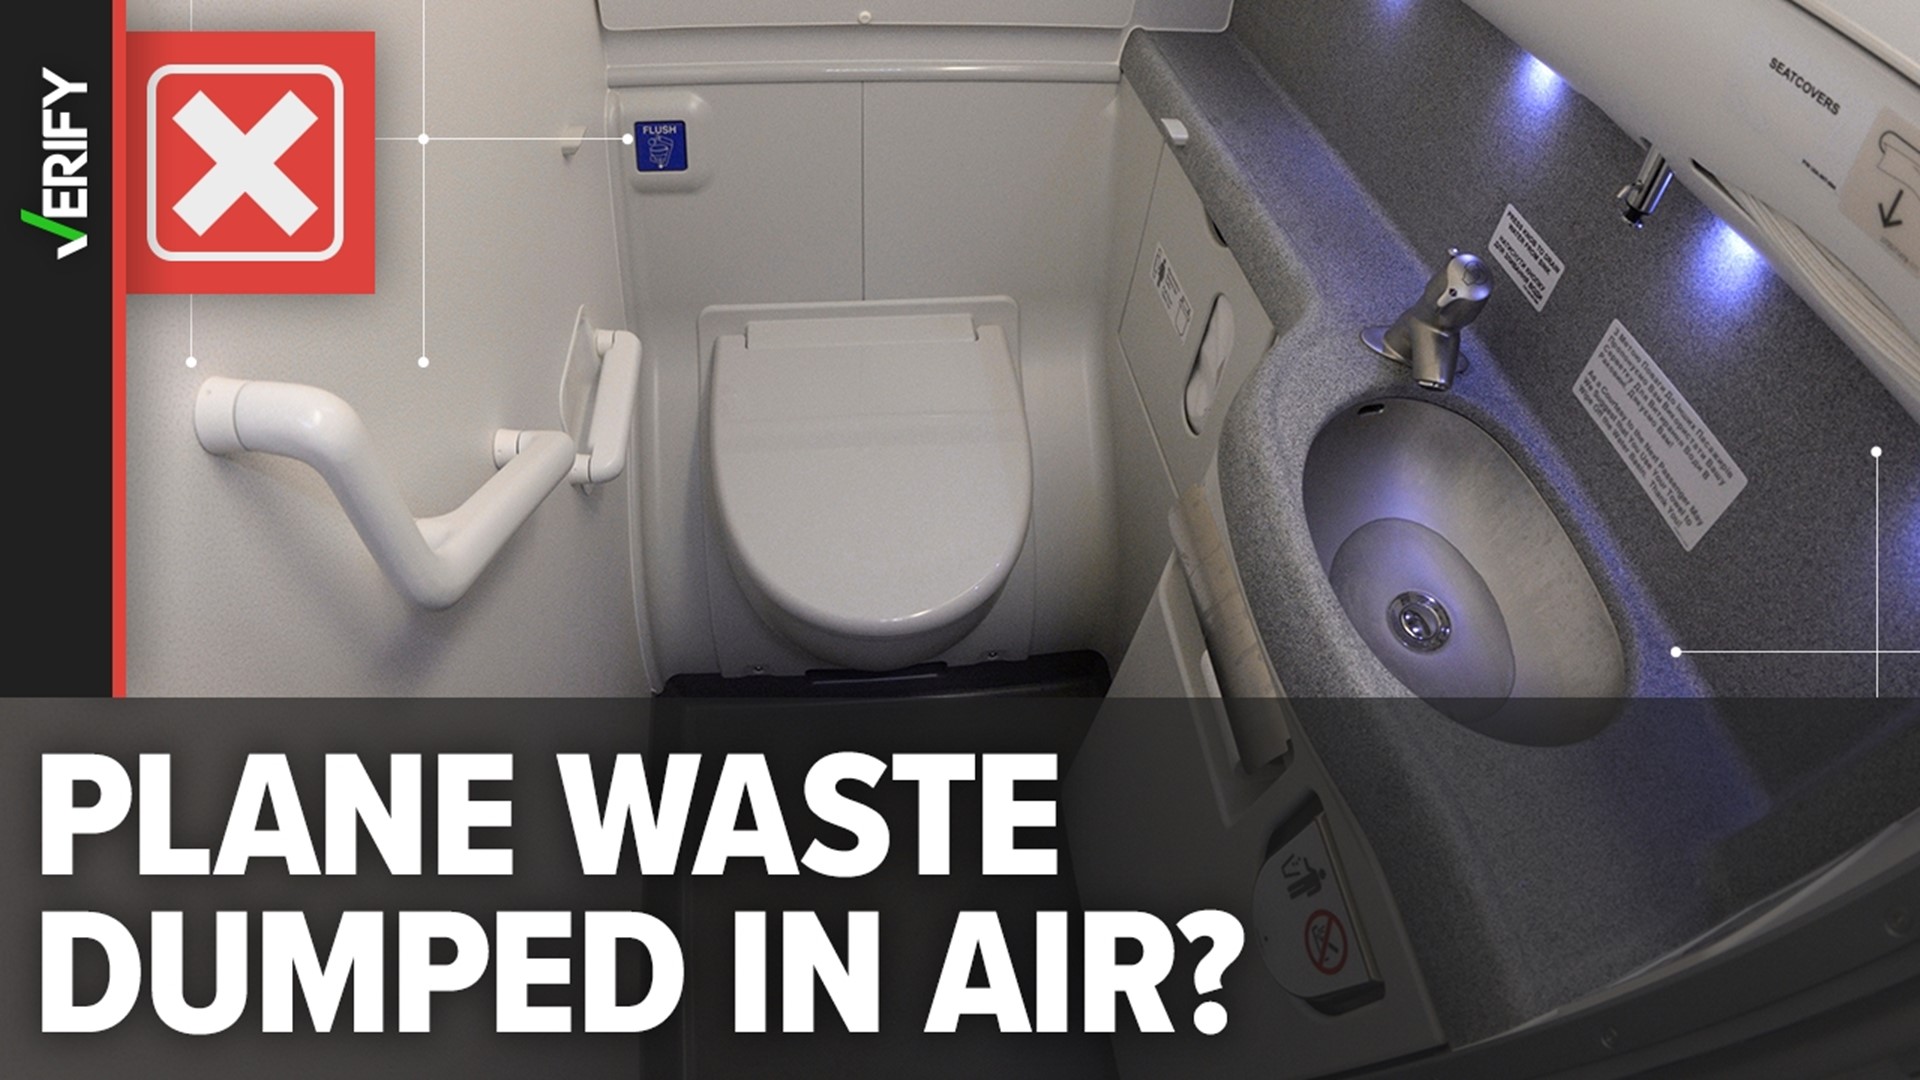 When a plane leaks sewage material, it freezes and can fall to the ground. This is known as blue ice. But a plane doesn’t drop toilet waste mid-flight on purpose.